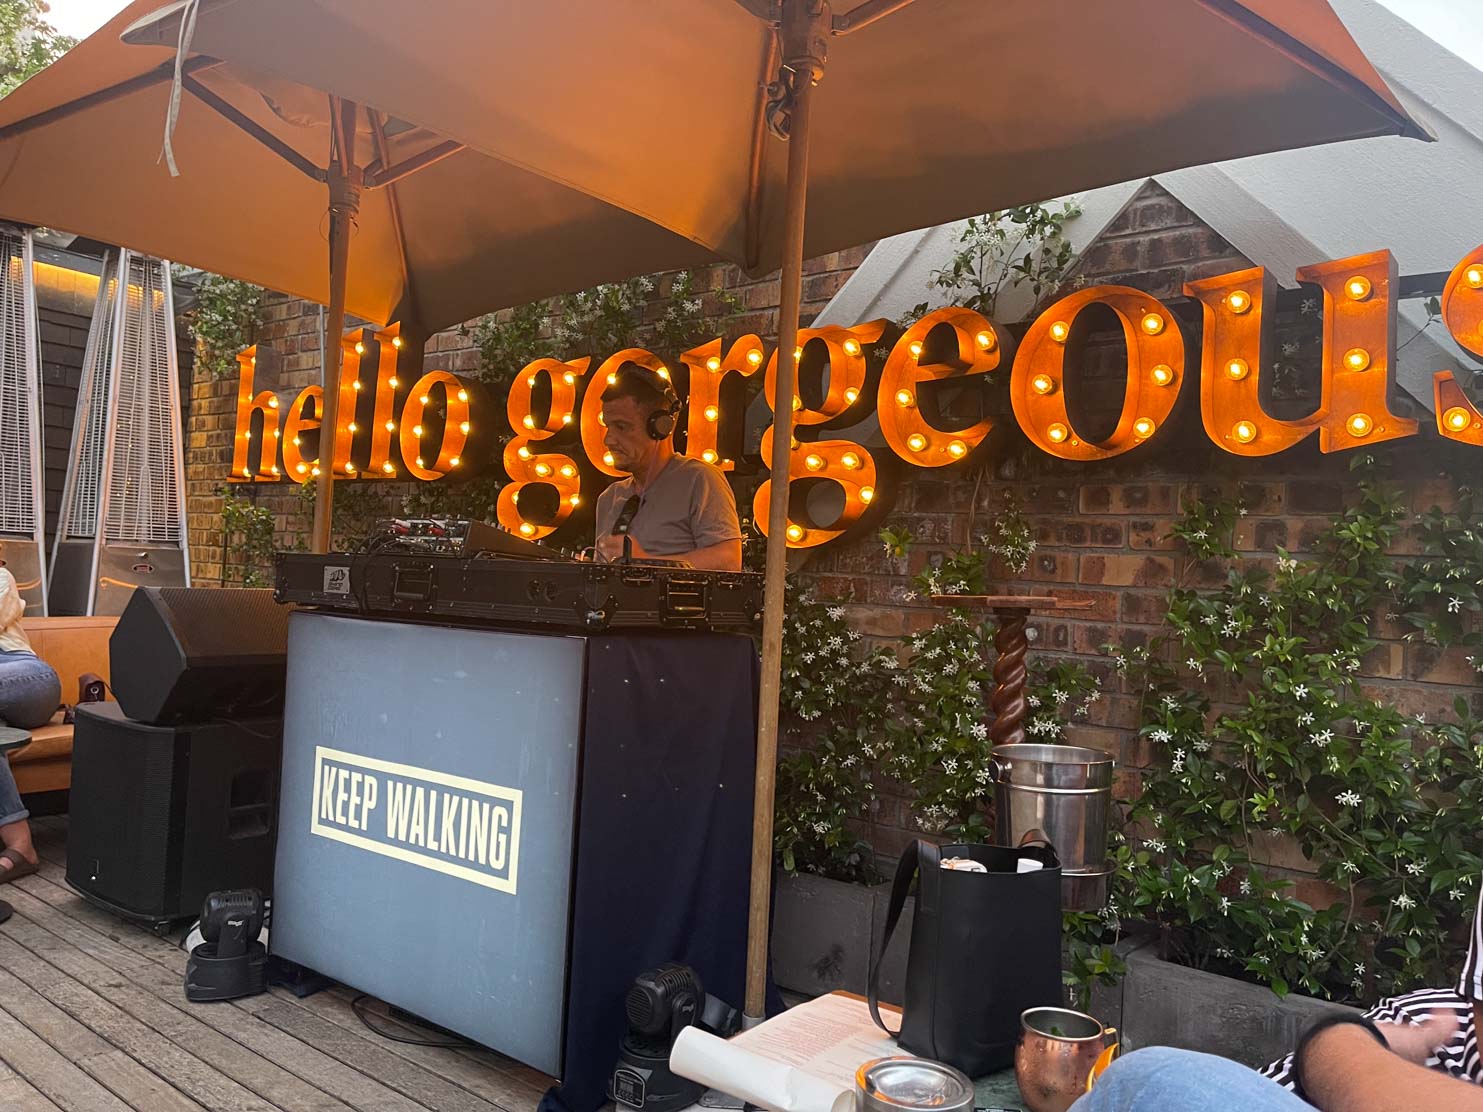 Gorgeous George Just in time for some after-work delights, Gigi put on her sparkles and transformed into a buzzing lounge with a DJ and all 